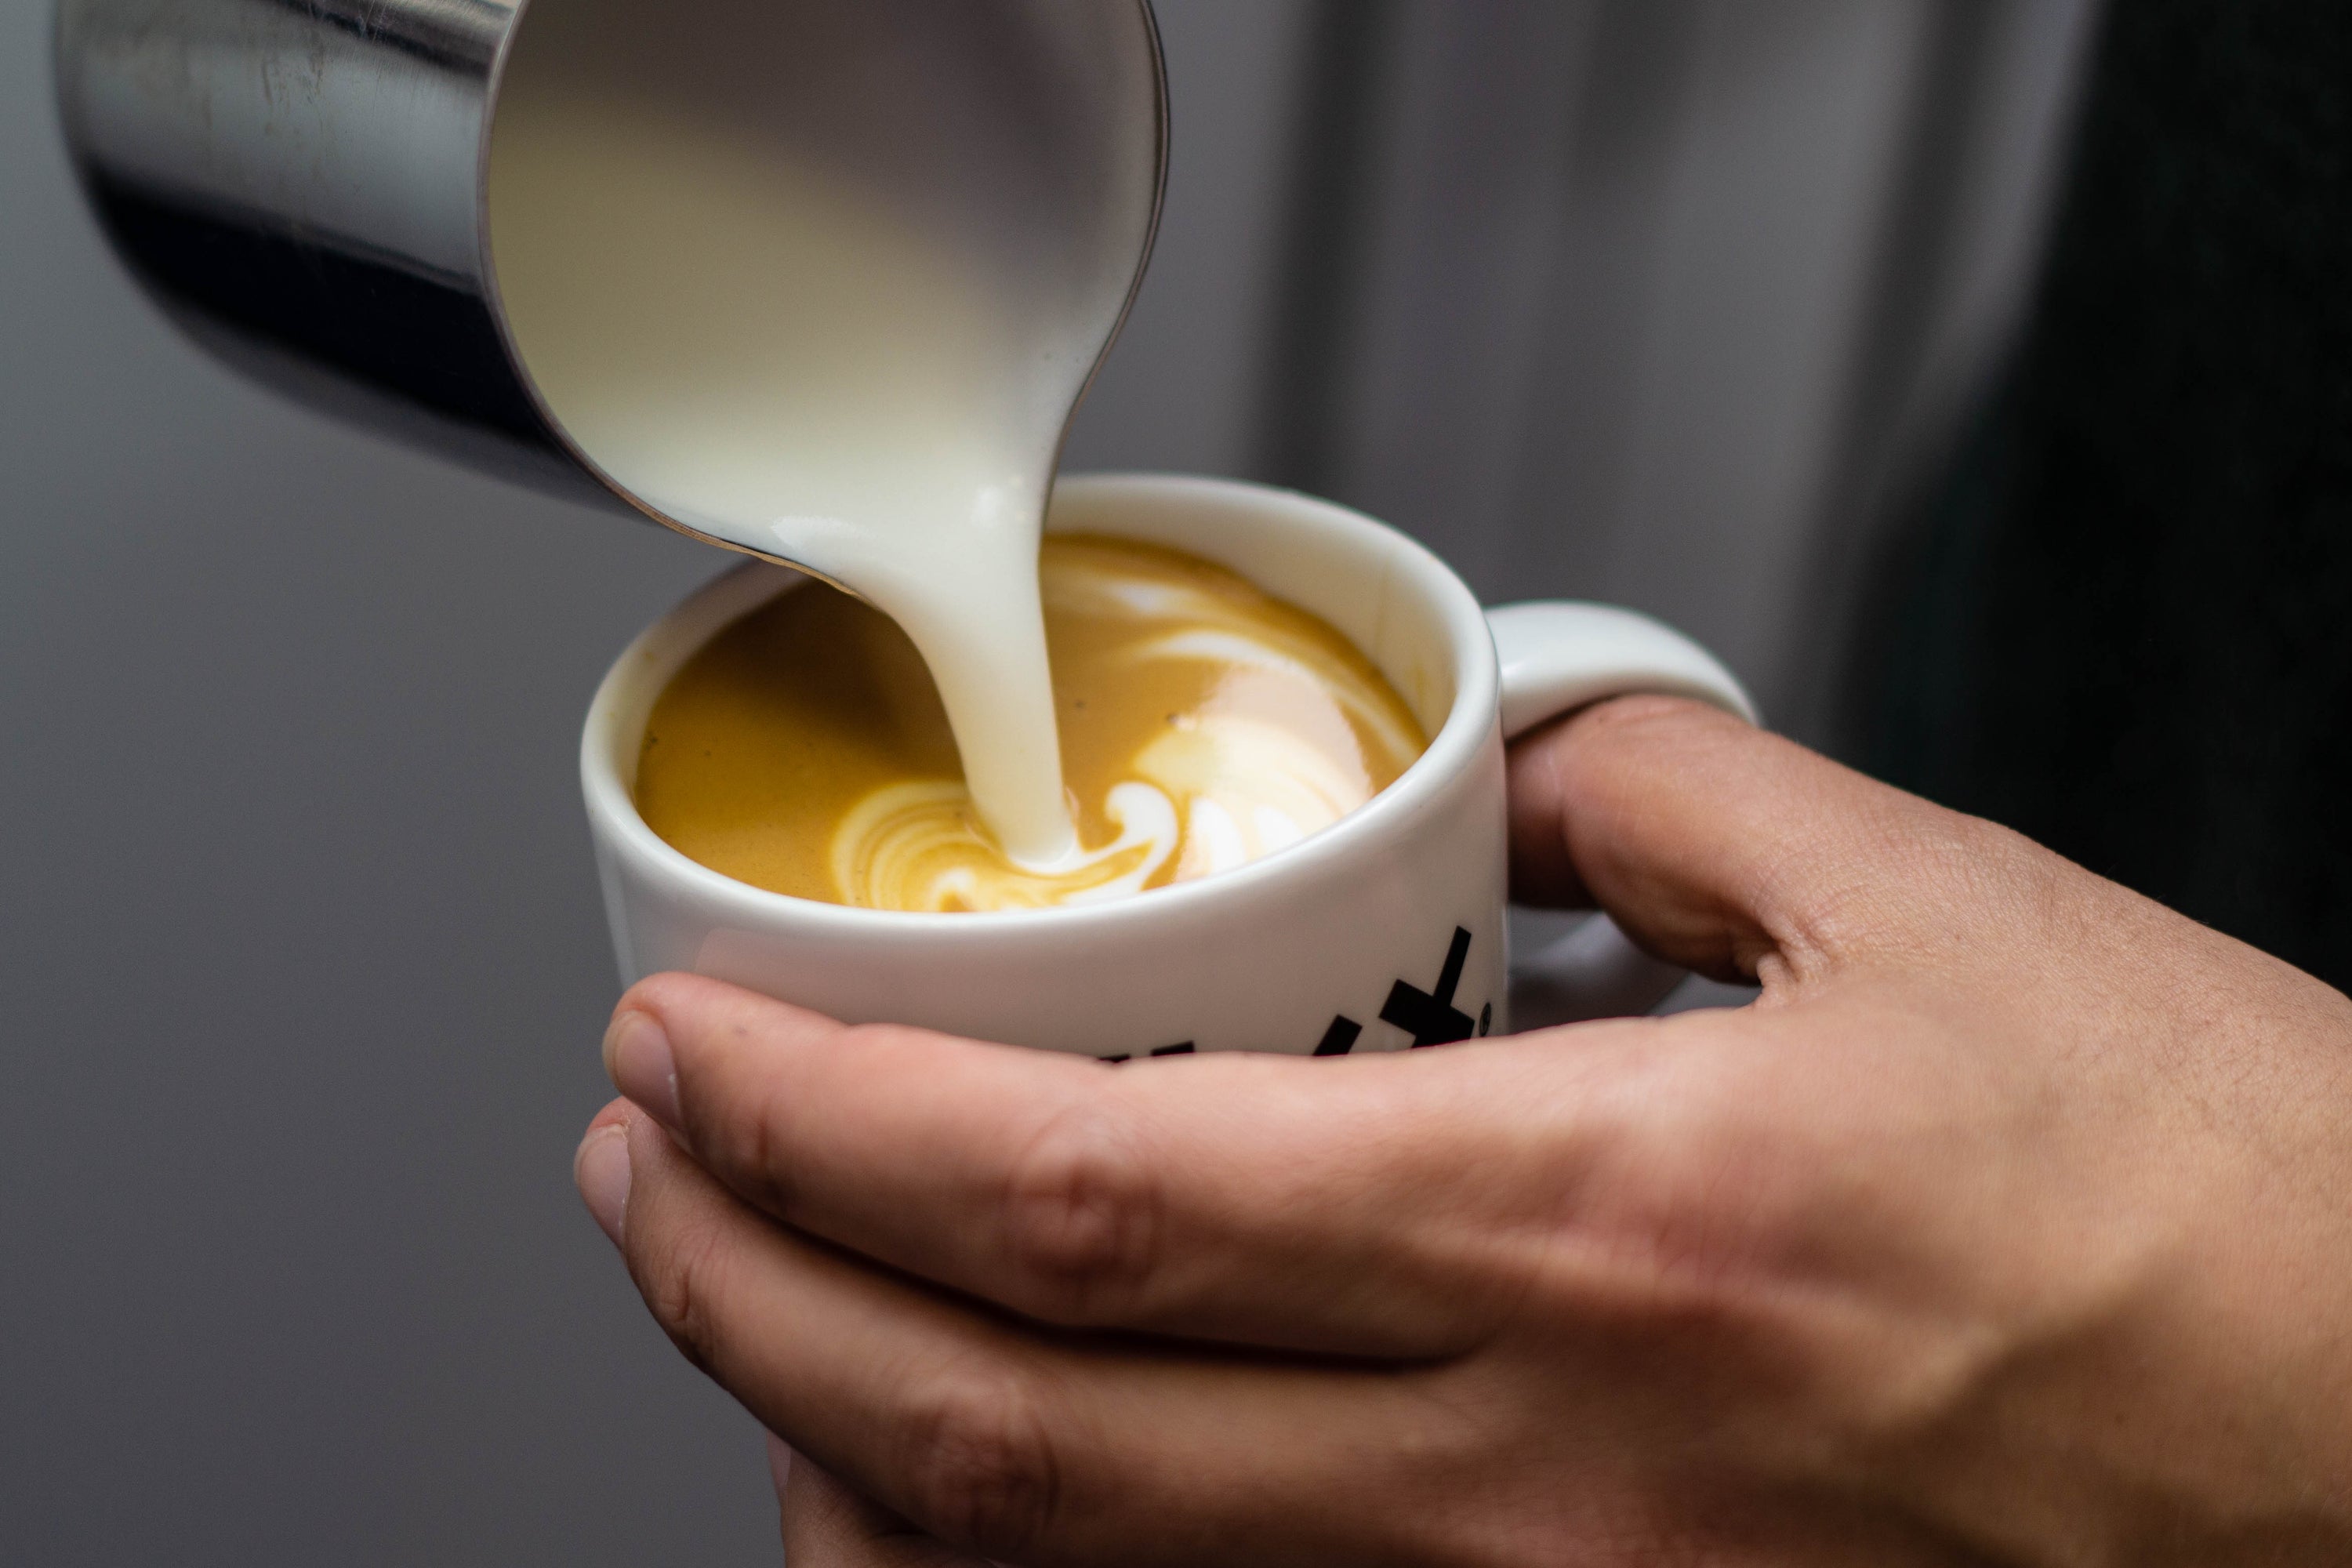 Oat Milk being pour into a cup of FiXX coffee to make a latte